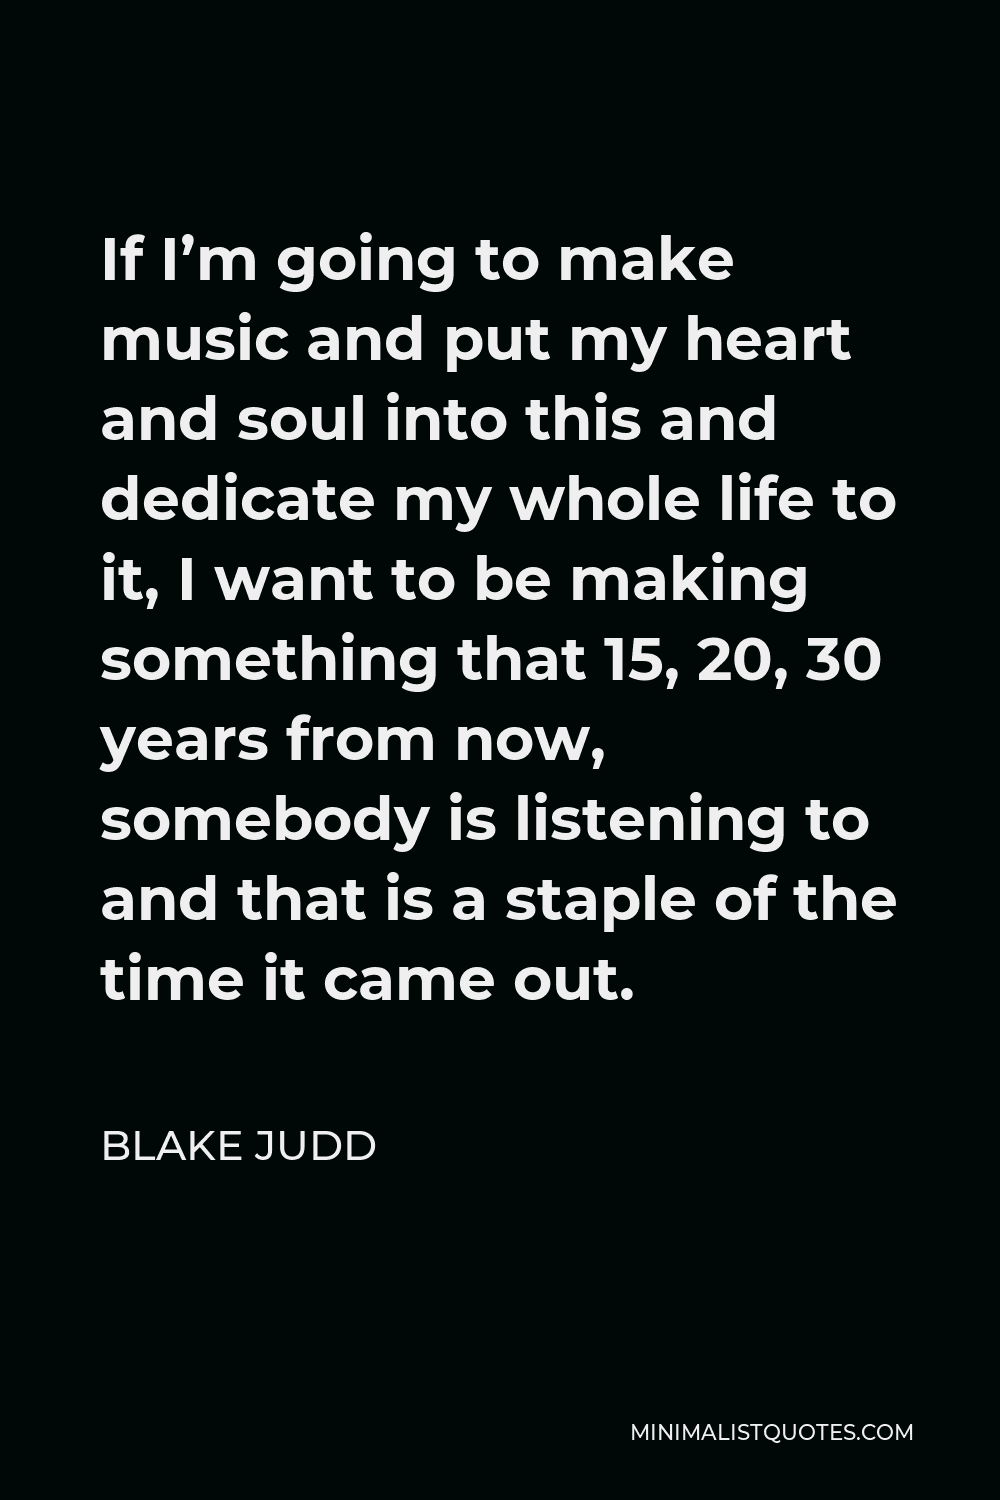 Blake Judd Quote - If I’m going to make music and put my heart and soul into this and dedicate my whole life to it, I want to be making something that 15, 20, 30 years from now, somebody is listening to and that is a staple of the time it came out.